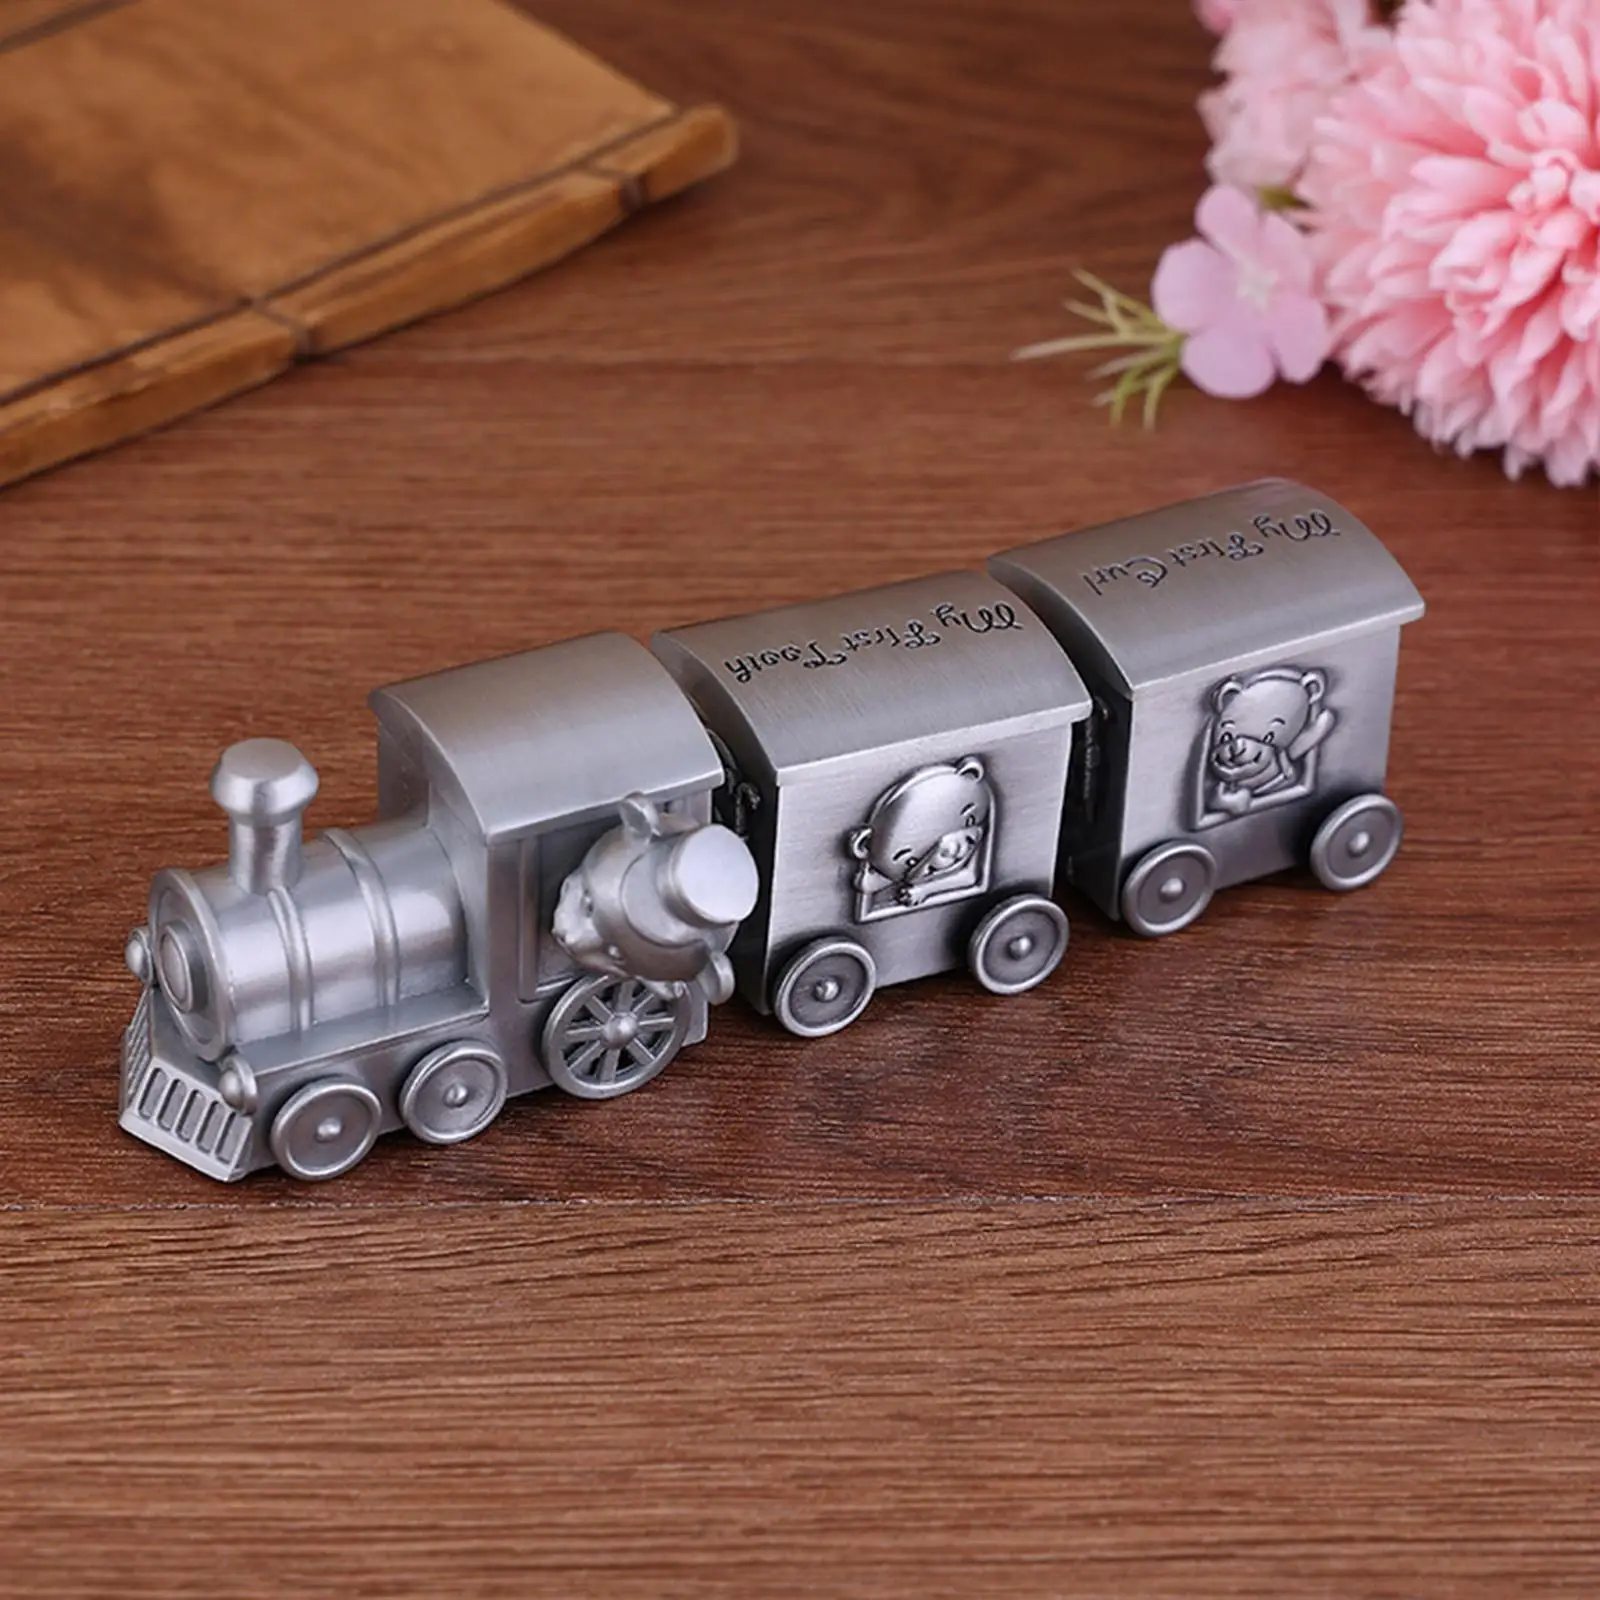 Baby Collections Box Metal Keepsakes Box for Nusery Decor Shower